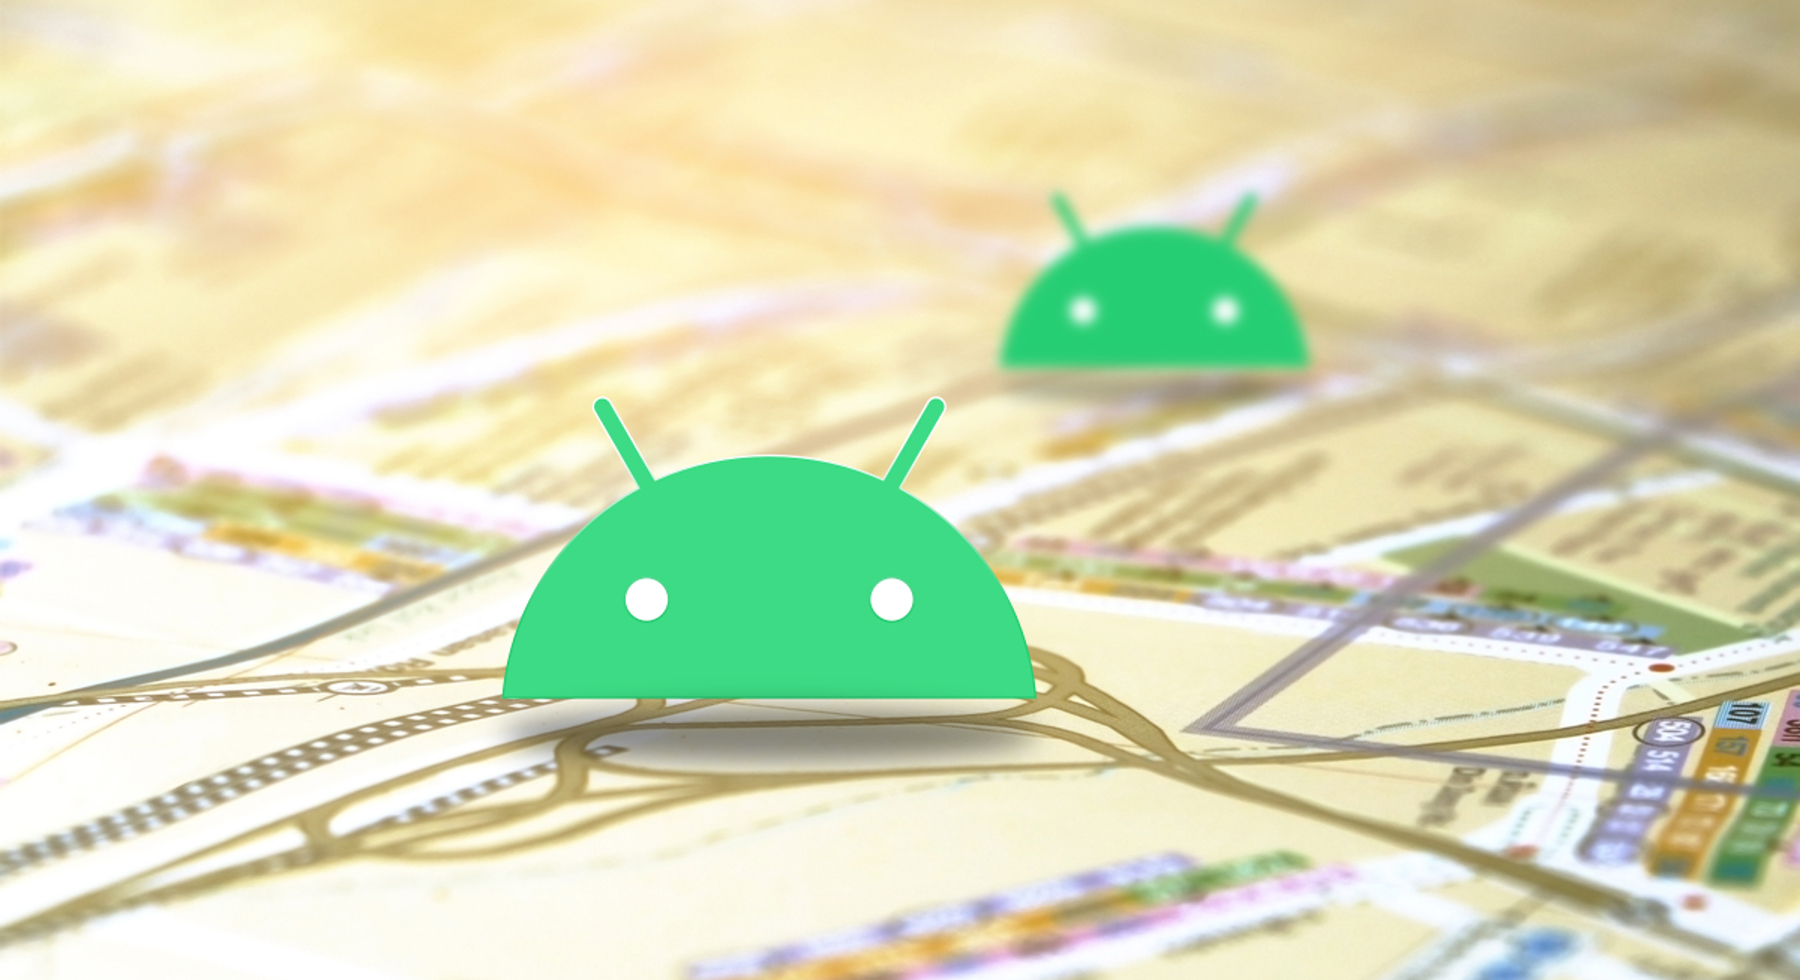 How to Fake Your Location on Android